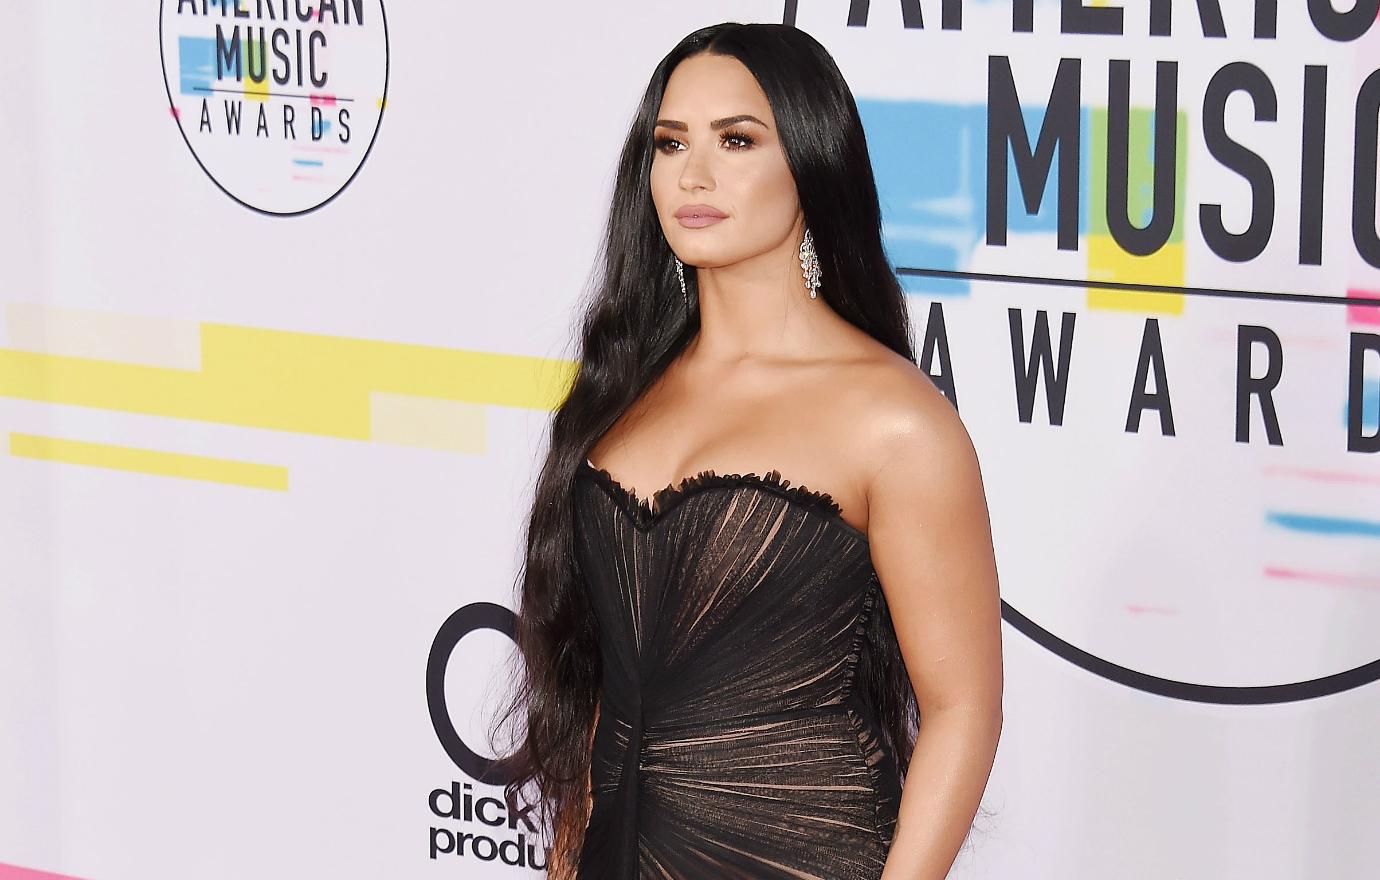 Demi Lovato wears a strapless black gown and sparkly earrings, hair long and wavy at the 2017 American Music Awards.